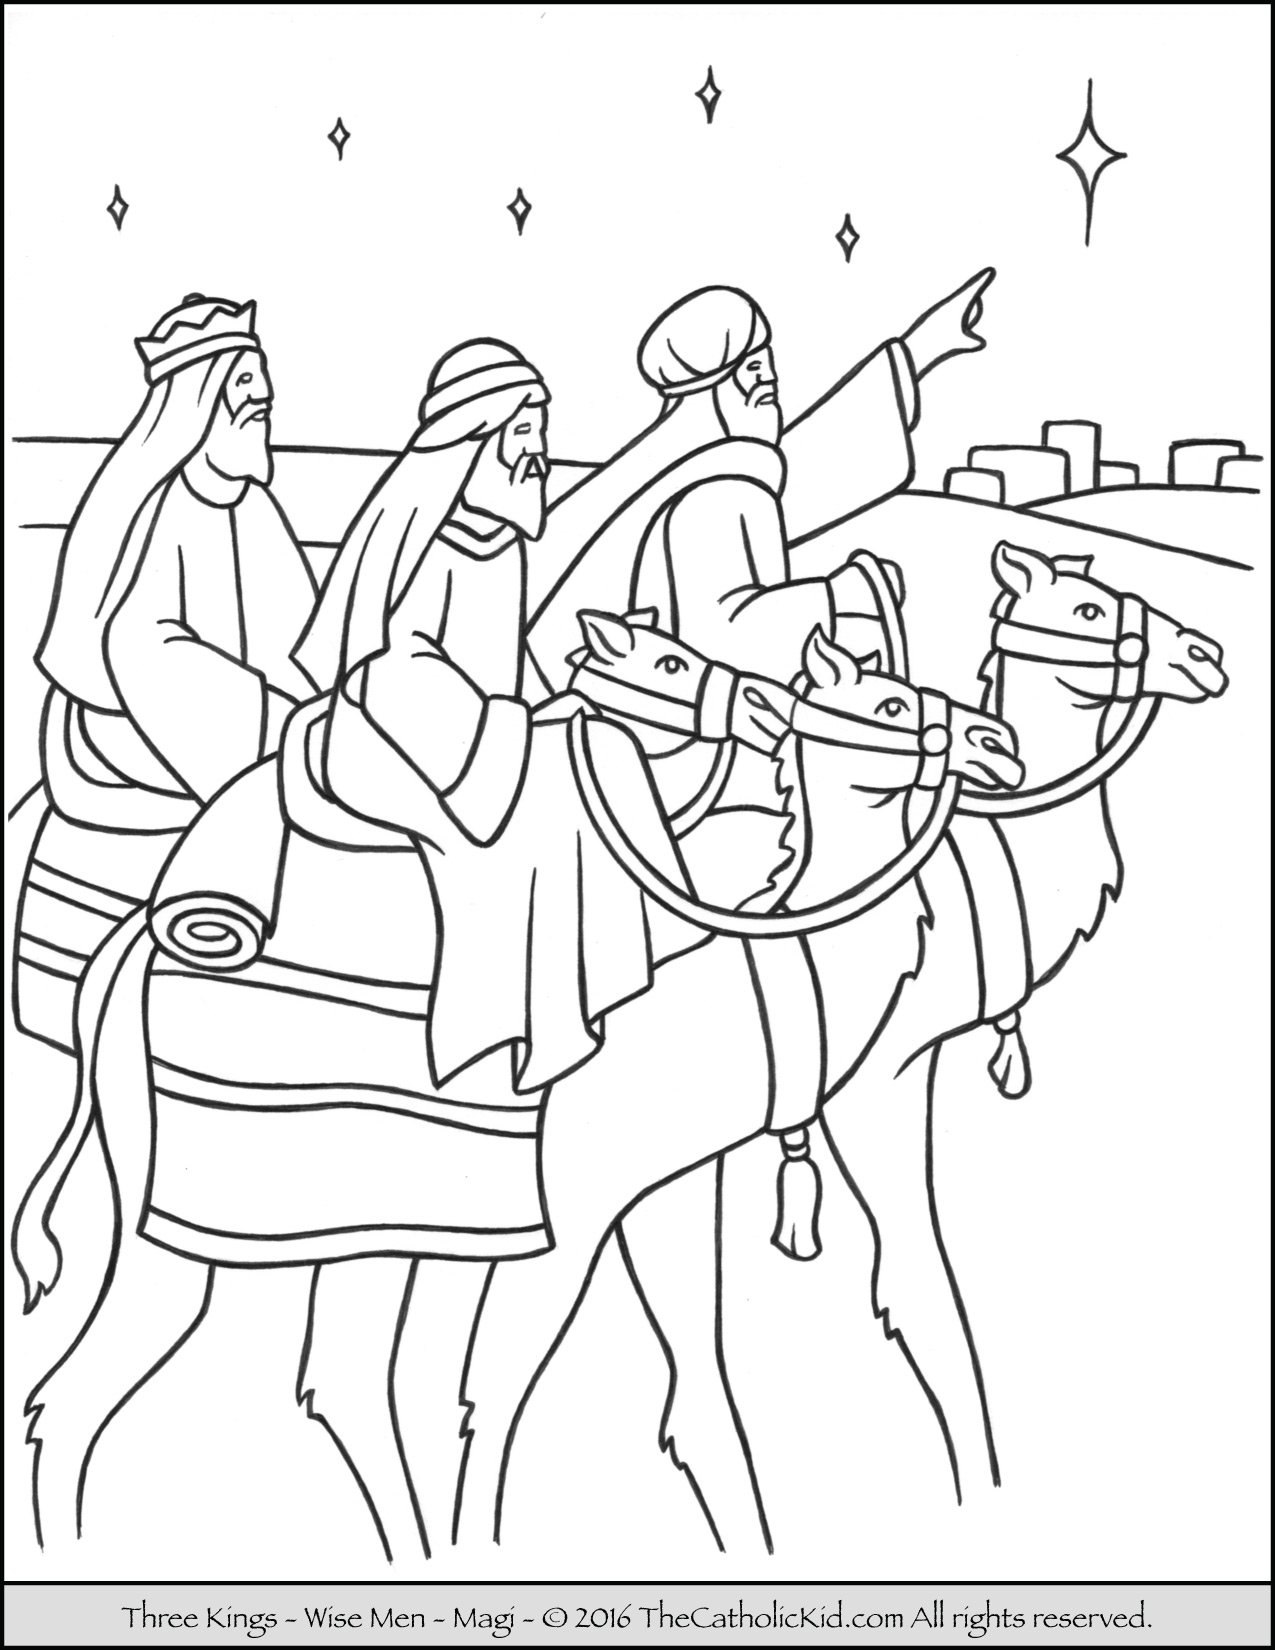 Epiphany house blessing coloring pages